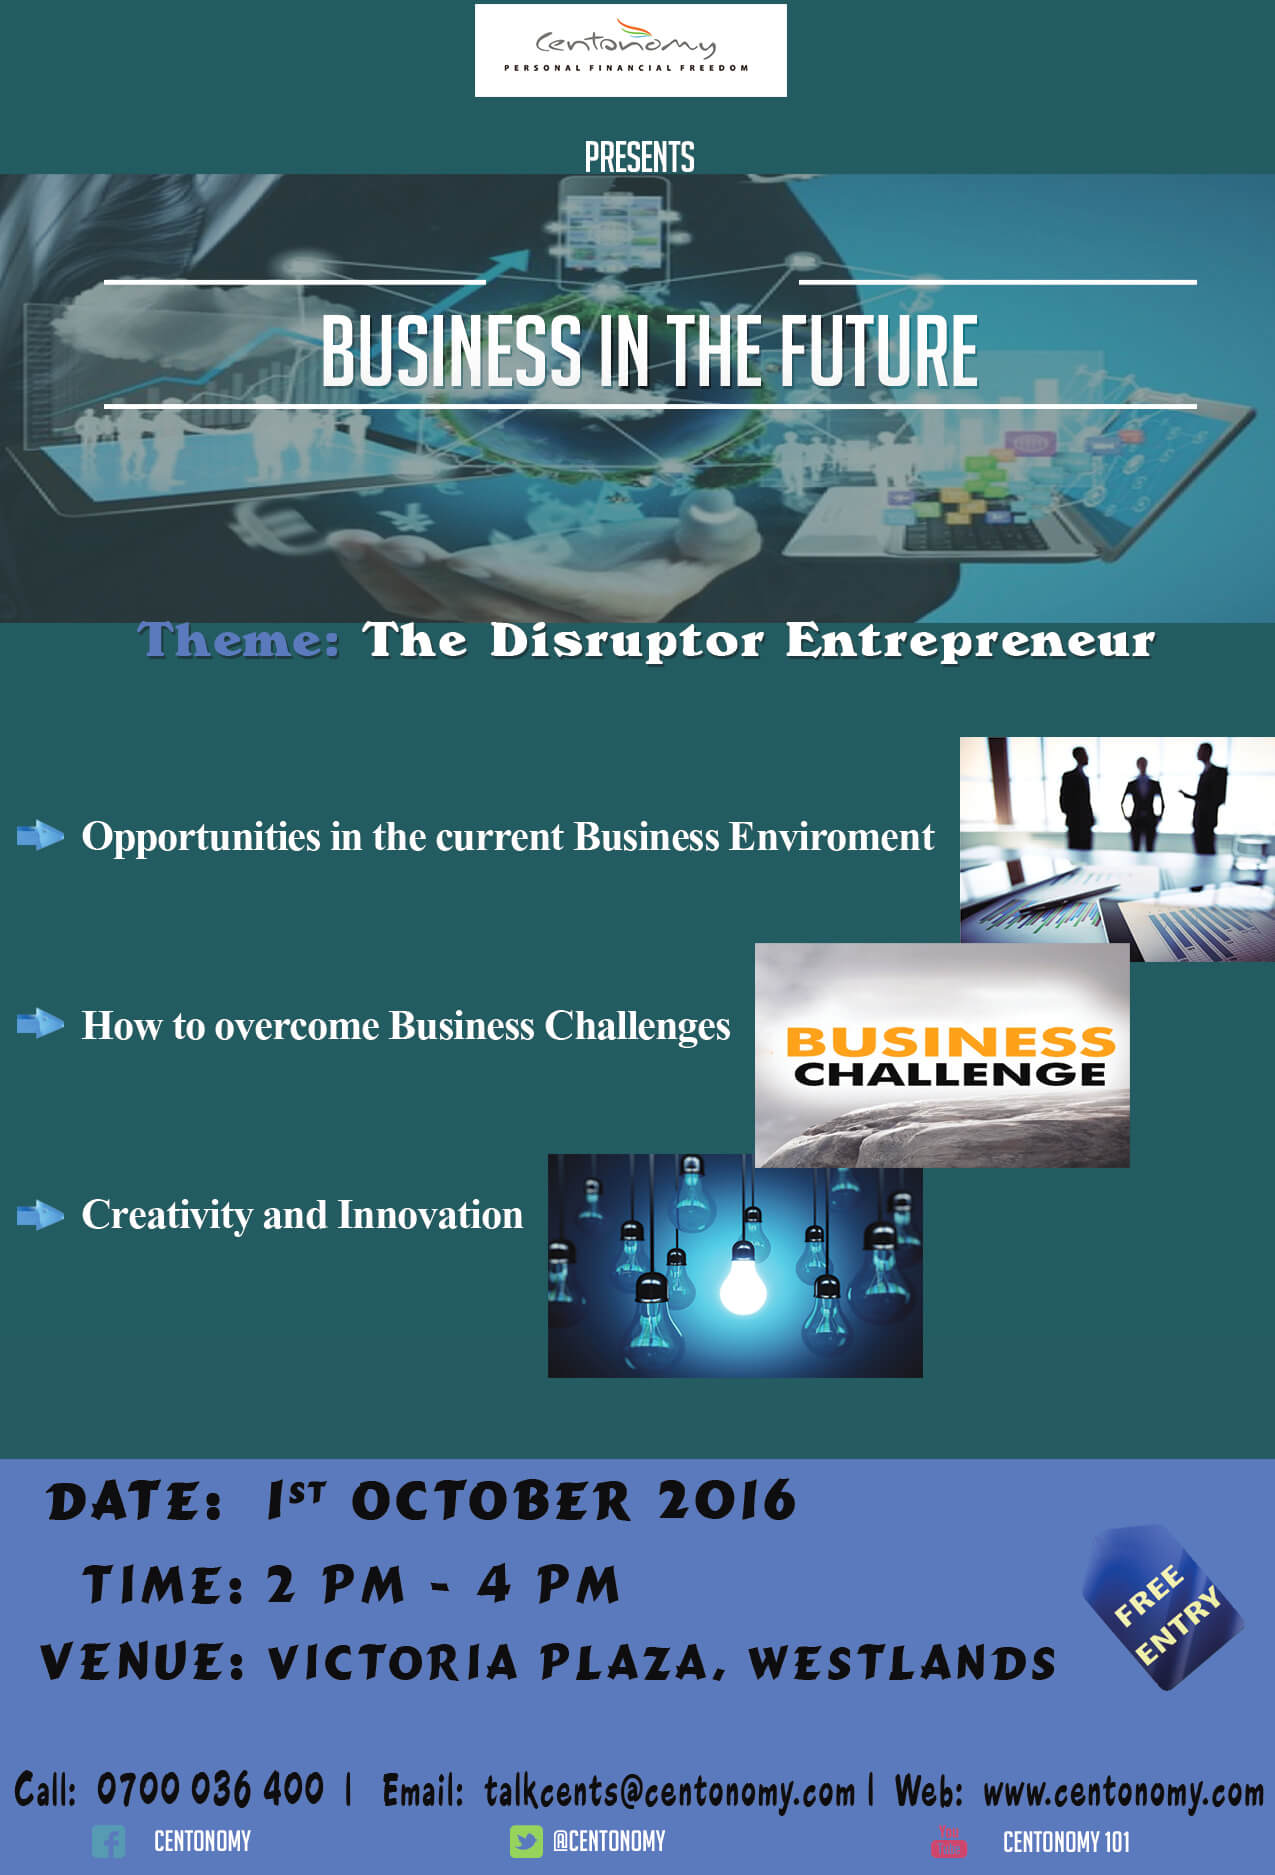 Entrepreneur, this is your Invitation